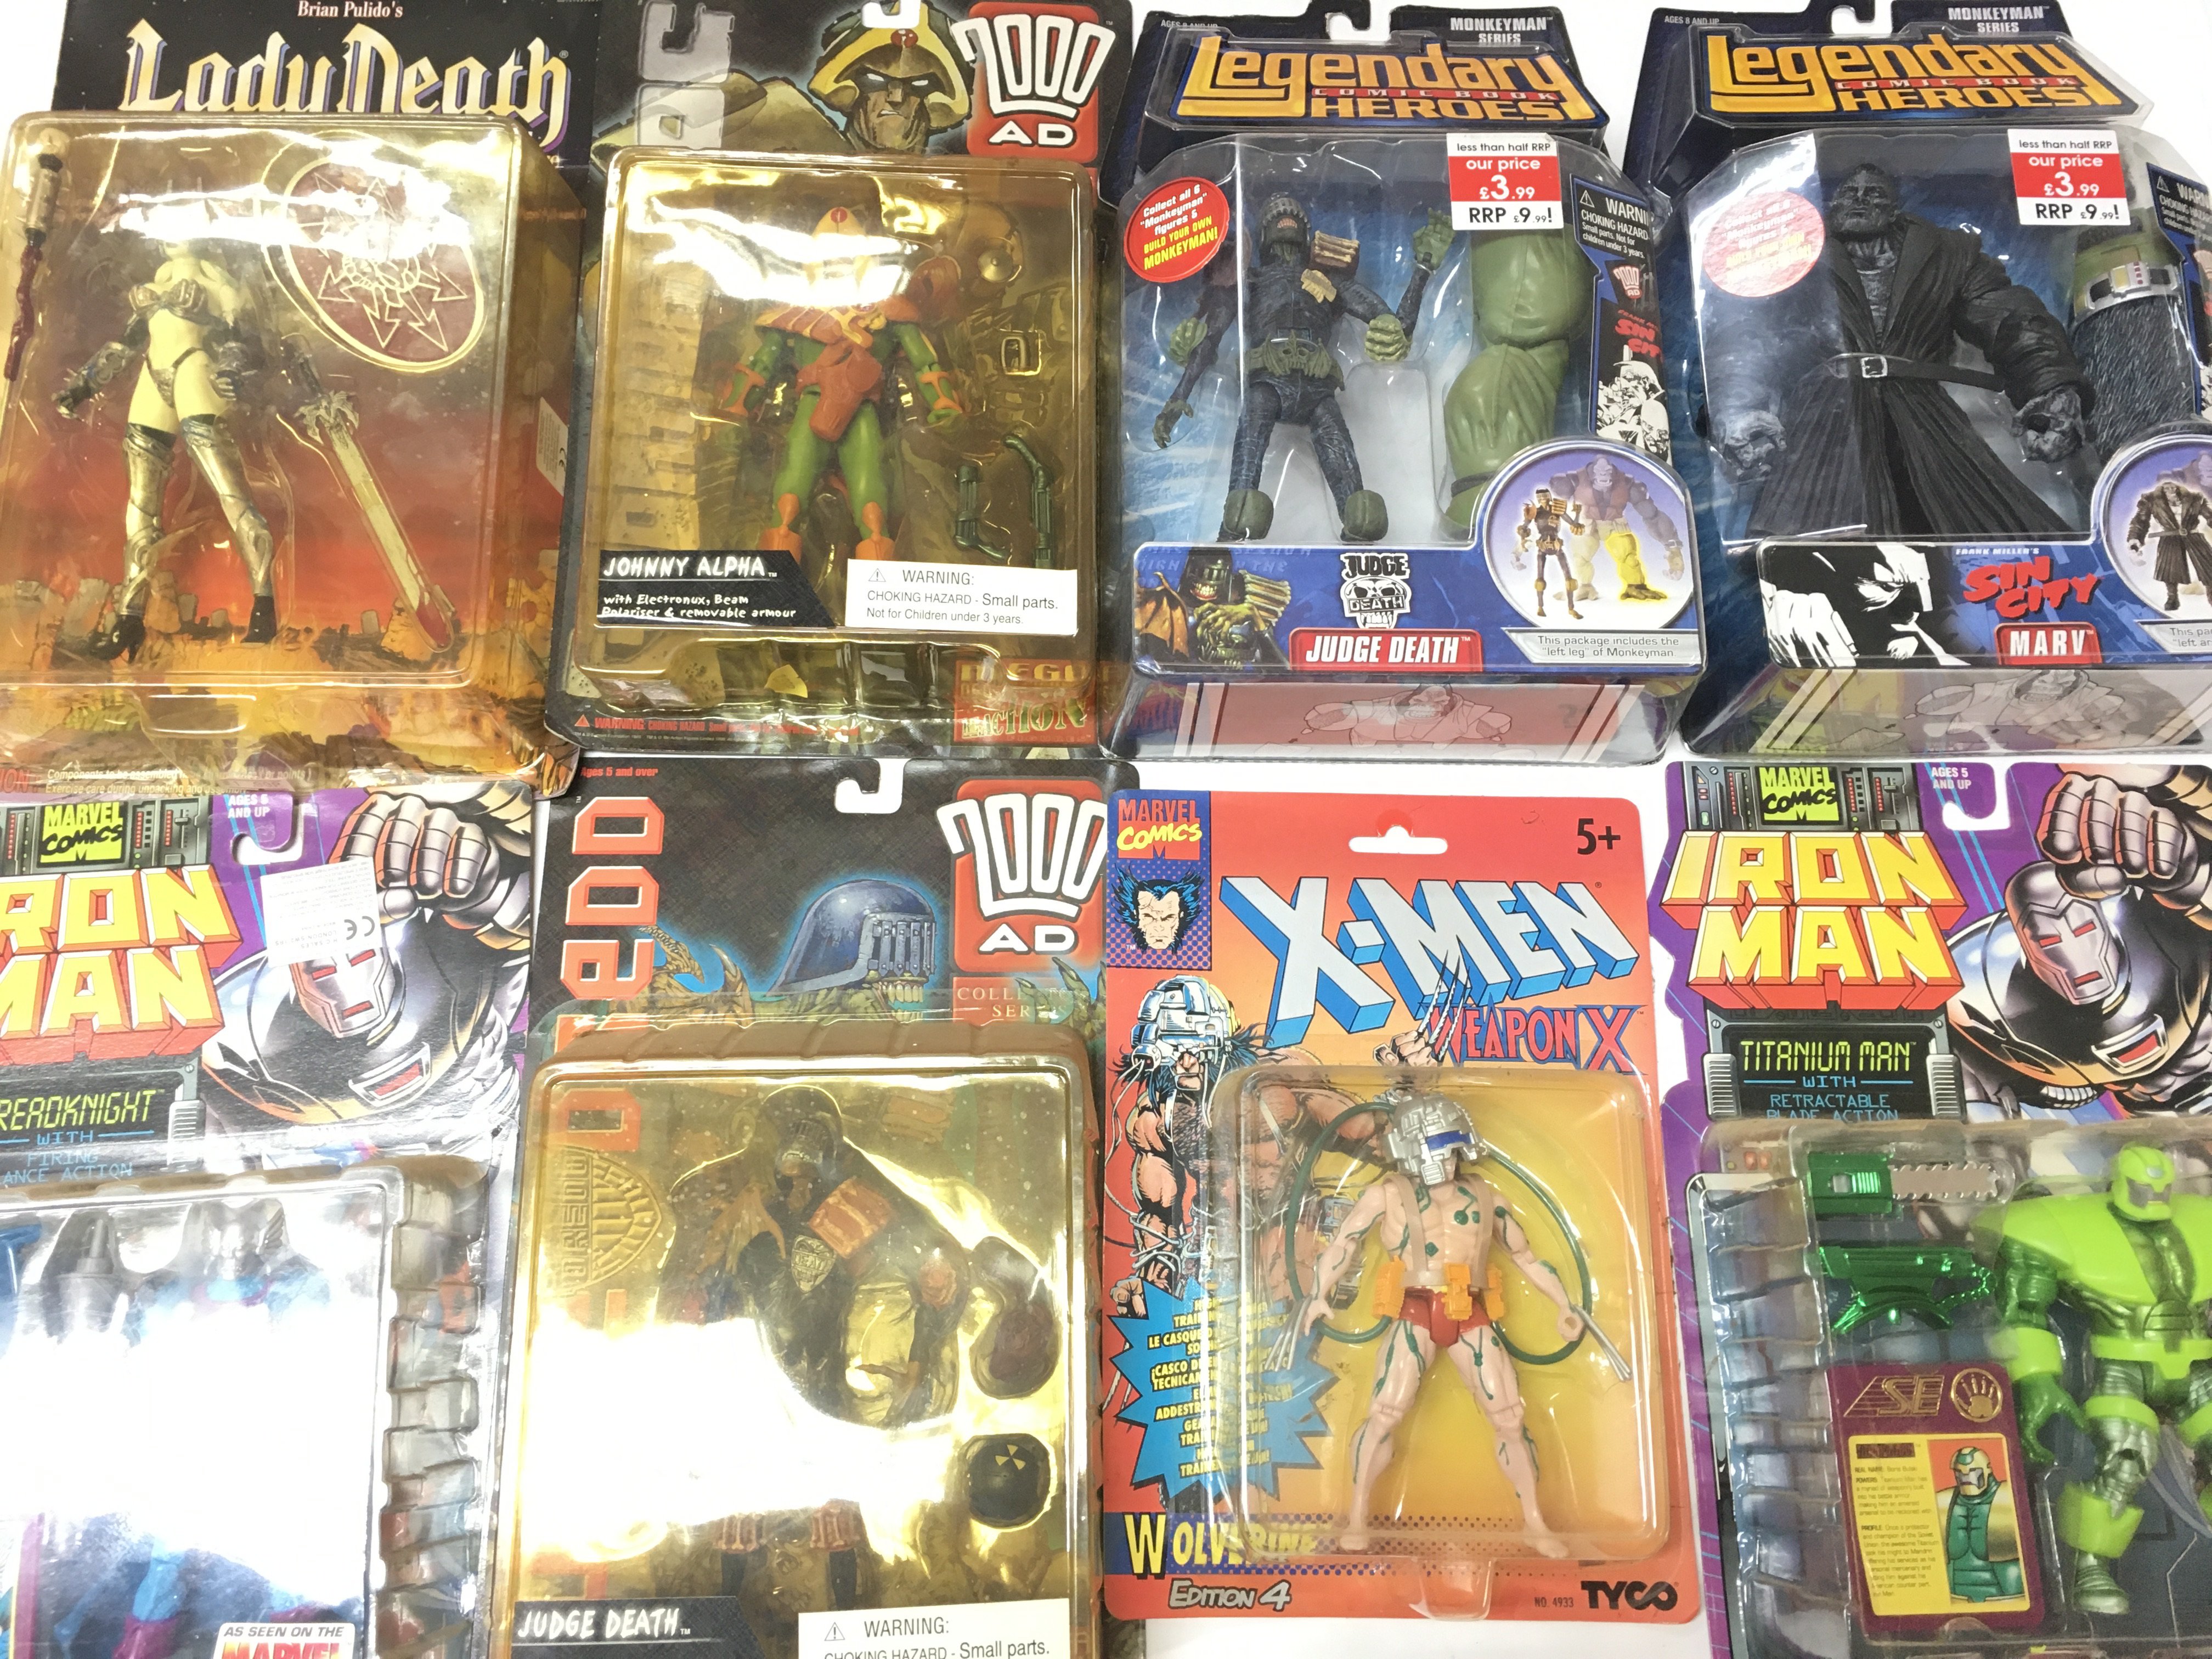 A Box Containing a Collection of Legendary Comic Book Hero Figures. X-Men and Judge Dredd. - Image 2 of 3